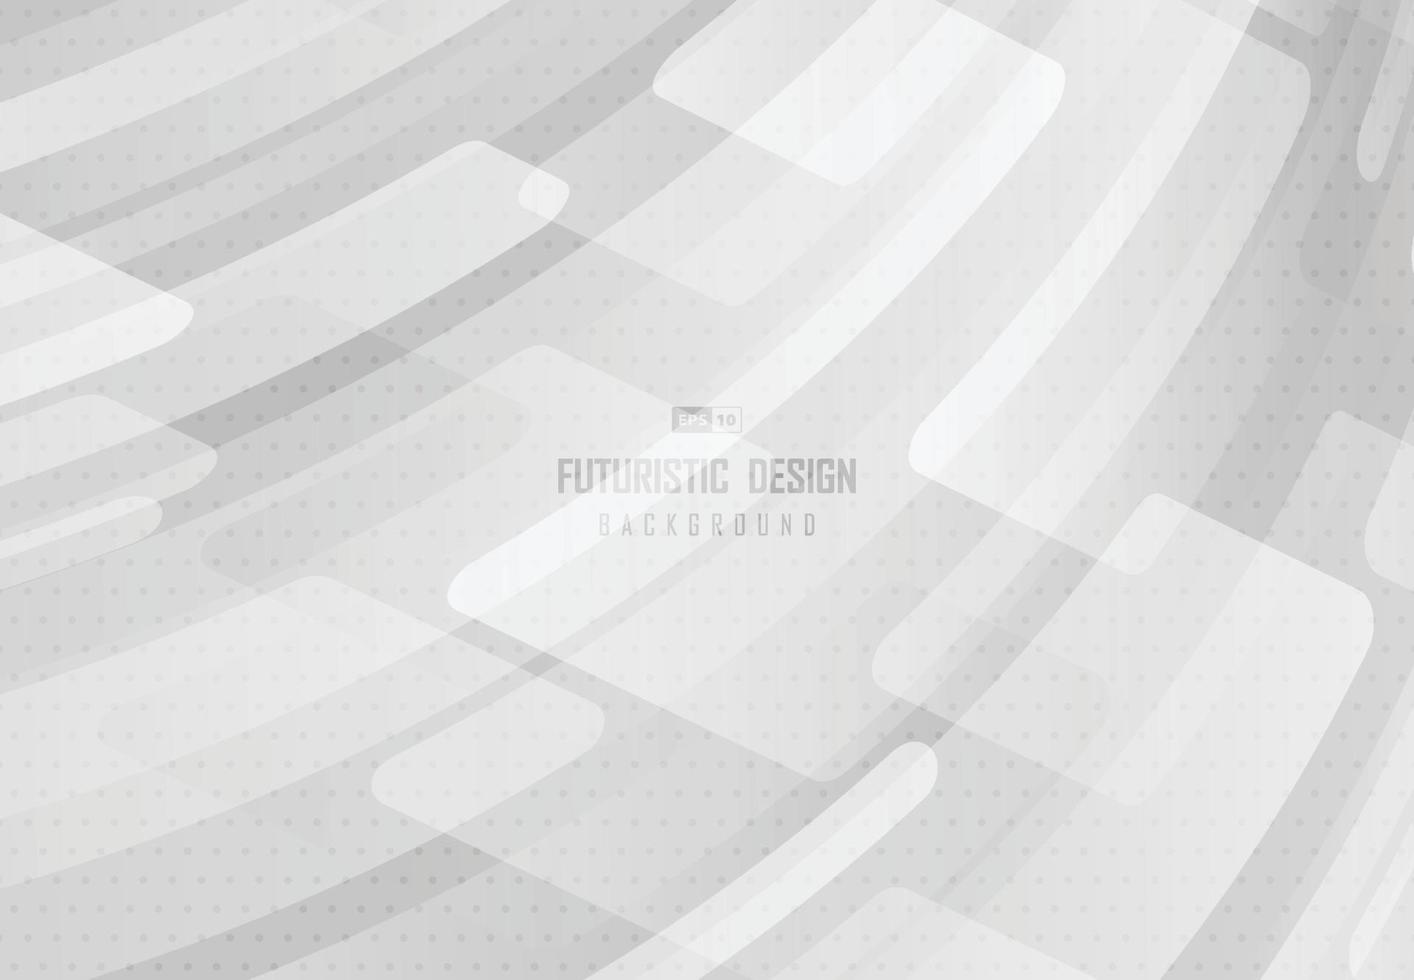 Abstract rectangles pattern design of futuristic artwork cover background. illustration vector eps10